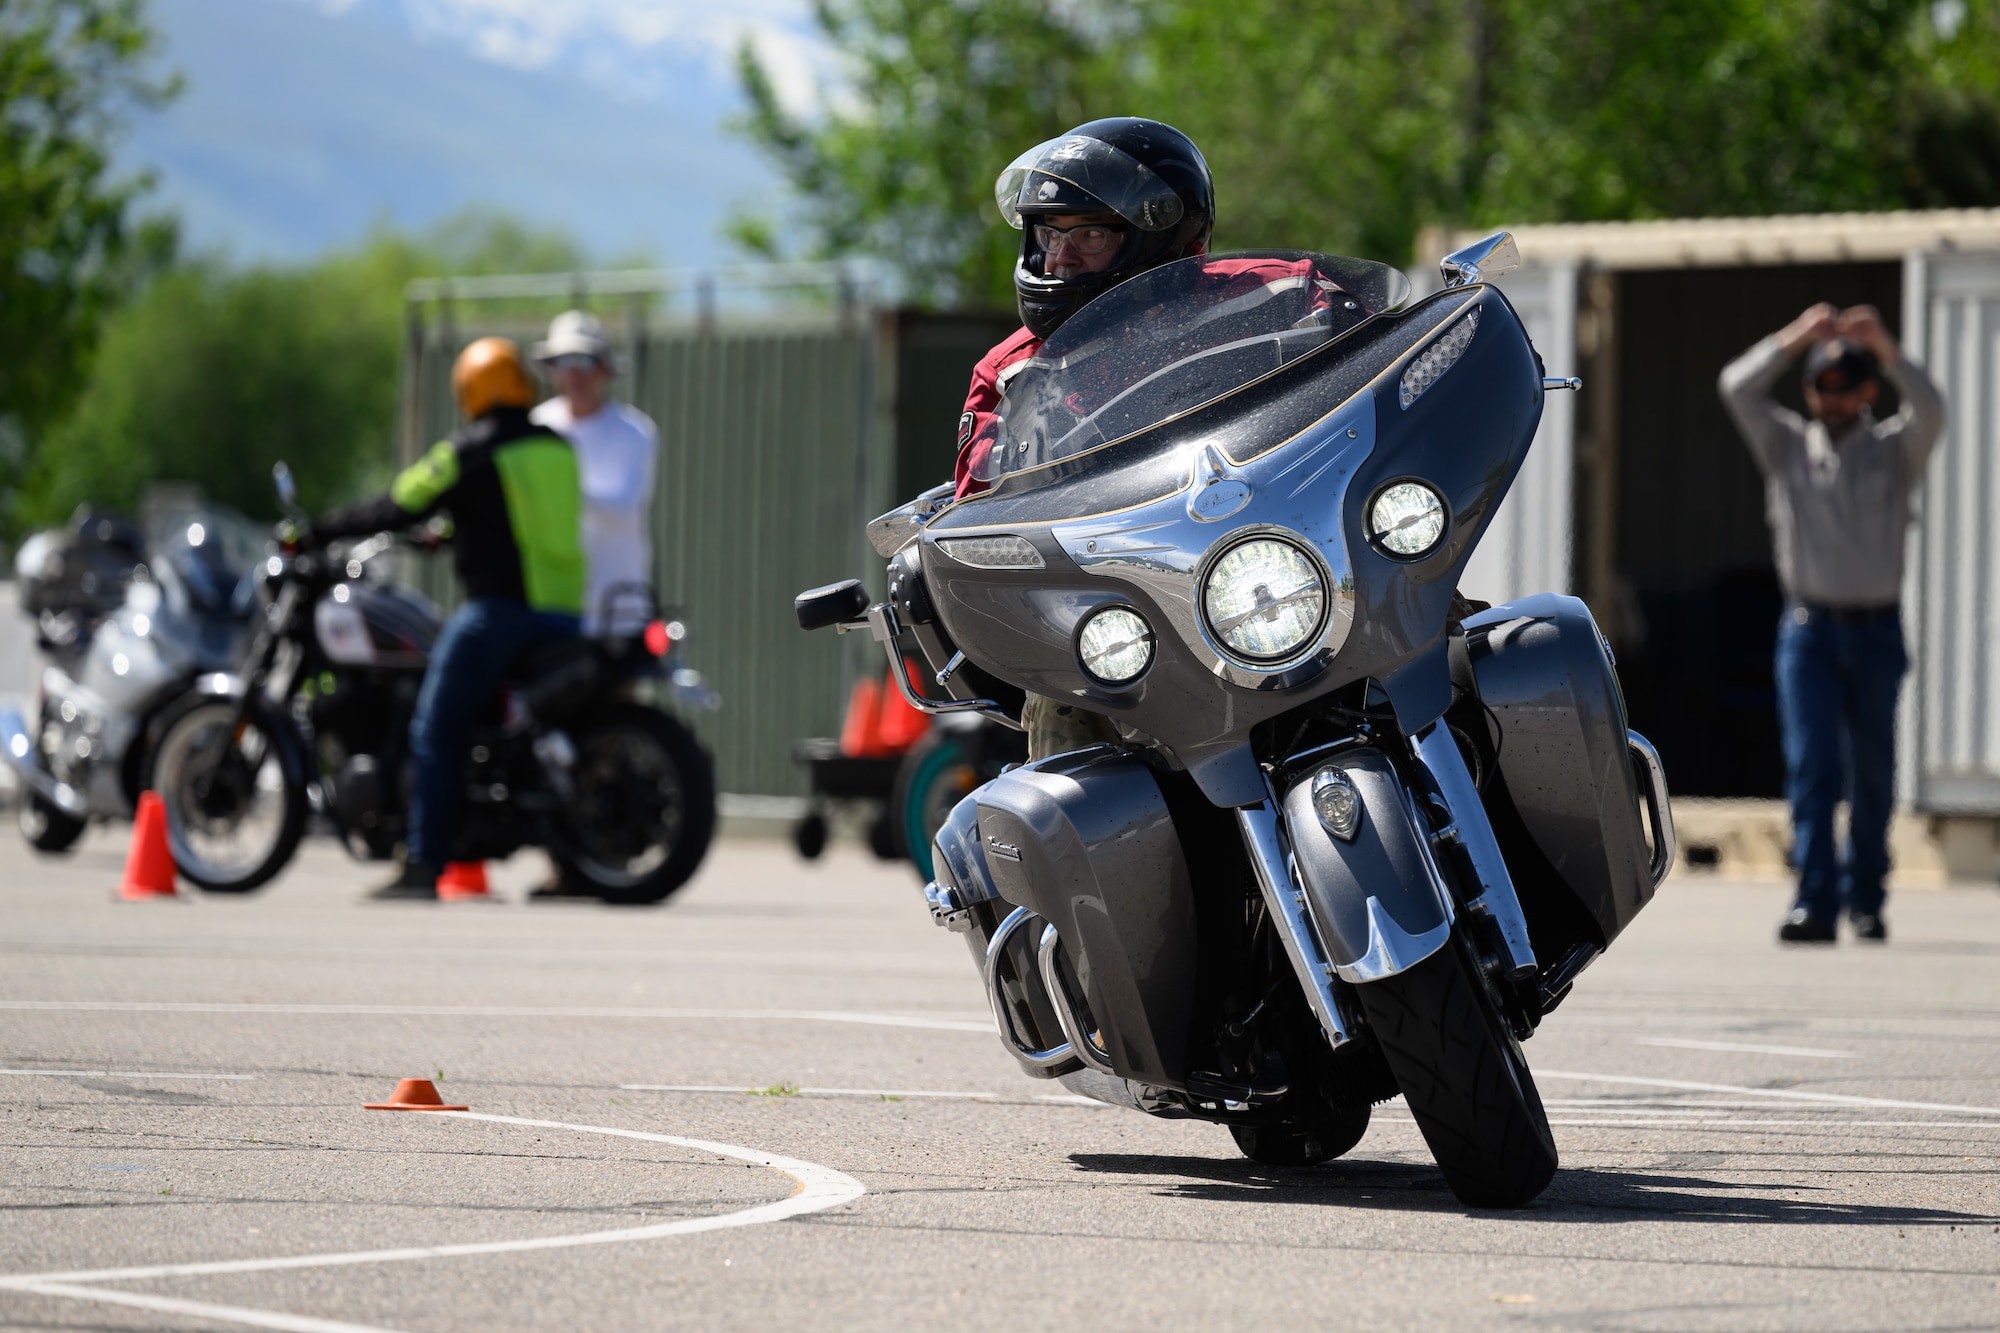 Mike Smith negotiates obstacles during a Basic Rider Course at Hill Air Force Base, Utah, May 26, 2023. The 75th Air Base Wing safety office maintains a SharePoint that provides motorcyclists with information and resources regarding safety, requirements and training for anyone with base access.  (U.S. Air Force photo by R. Nial Bradshaw)